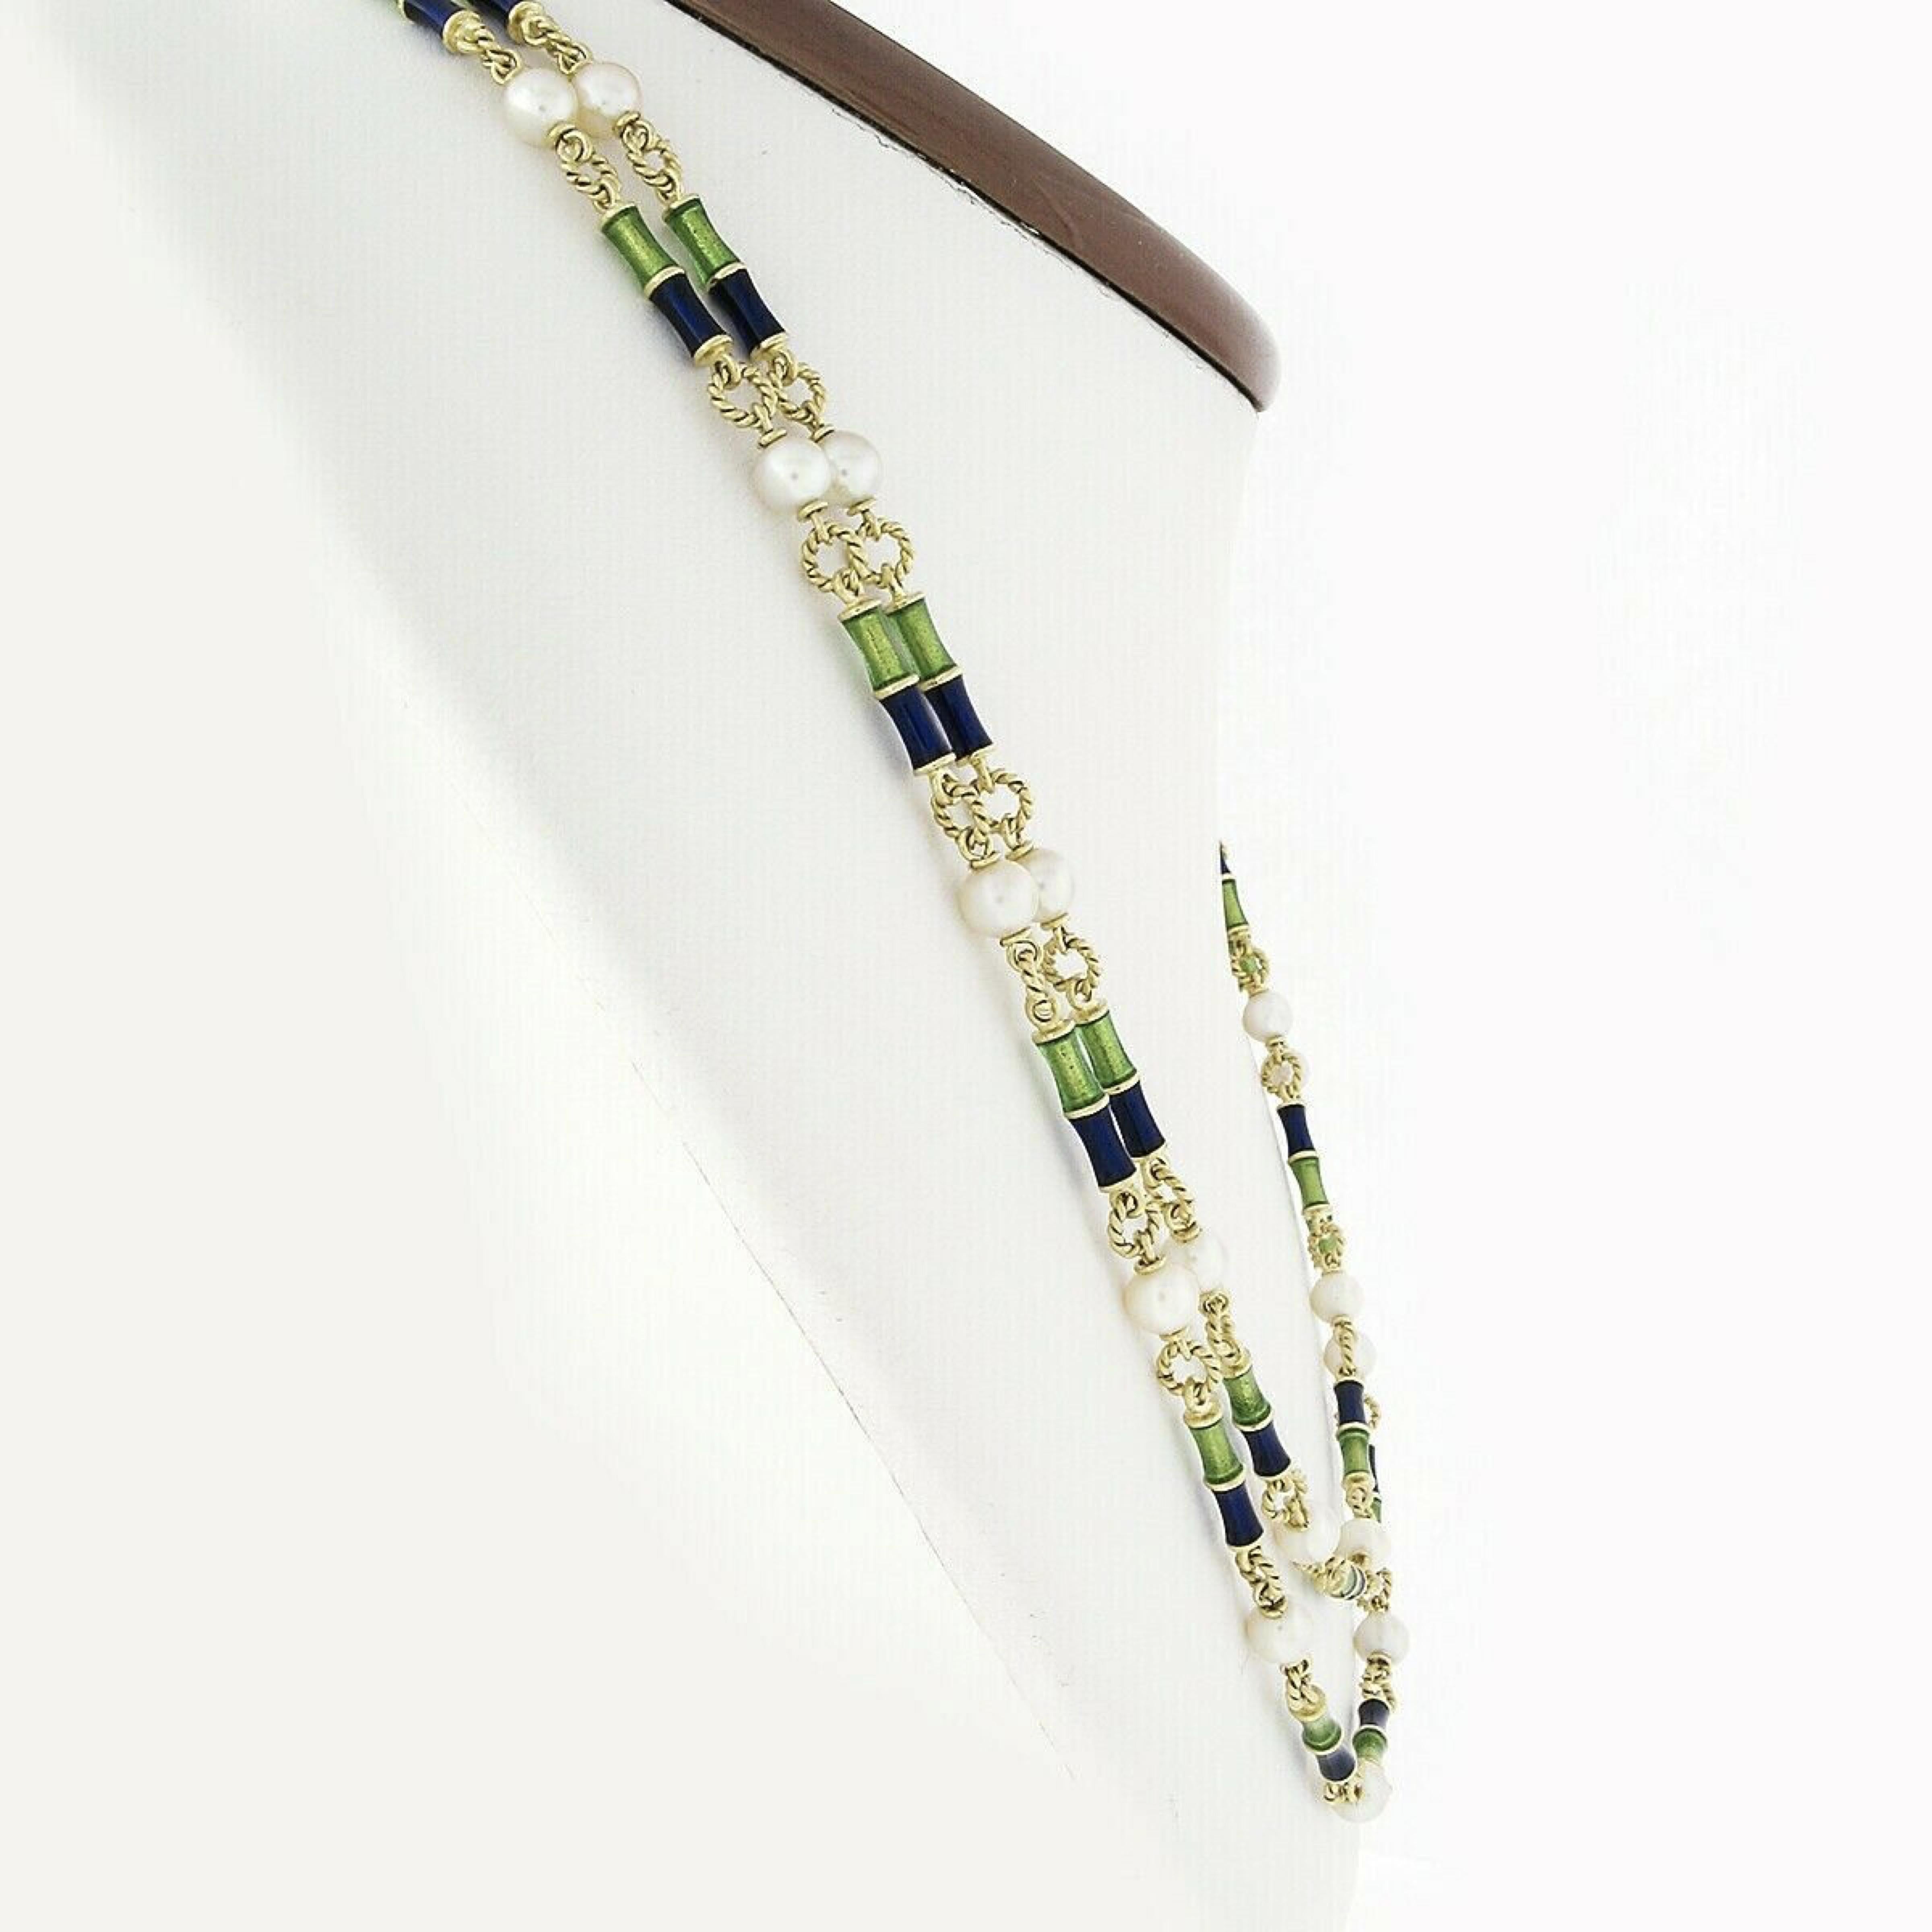 Here we have a beautiful vintage pearl by the yard style necklace that is crafted from solid 18k yellow gold and features blue and green enamel links. The 33 cultured pearls show beautiful white color with beige overtones showing great luster. These